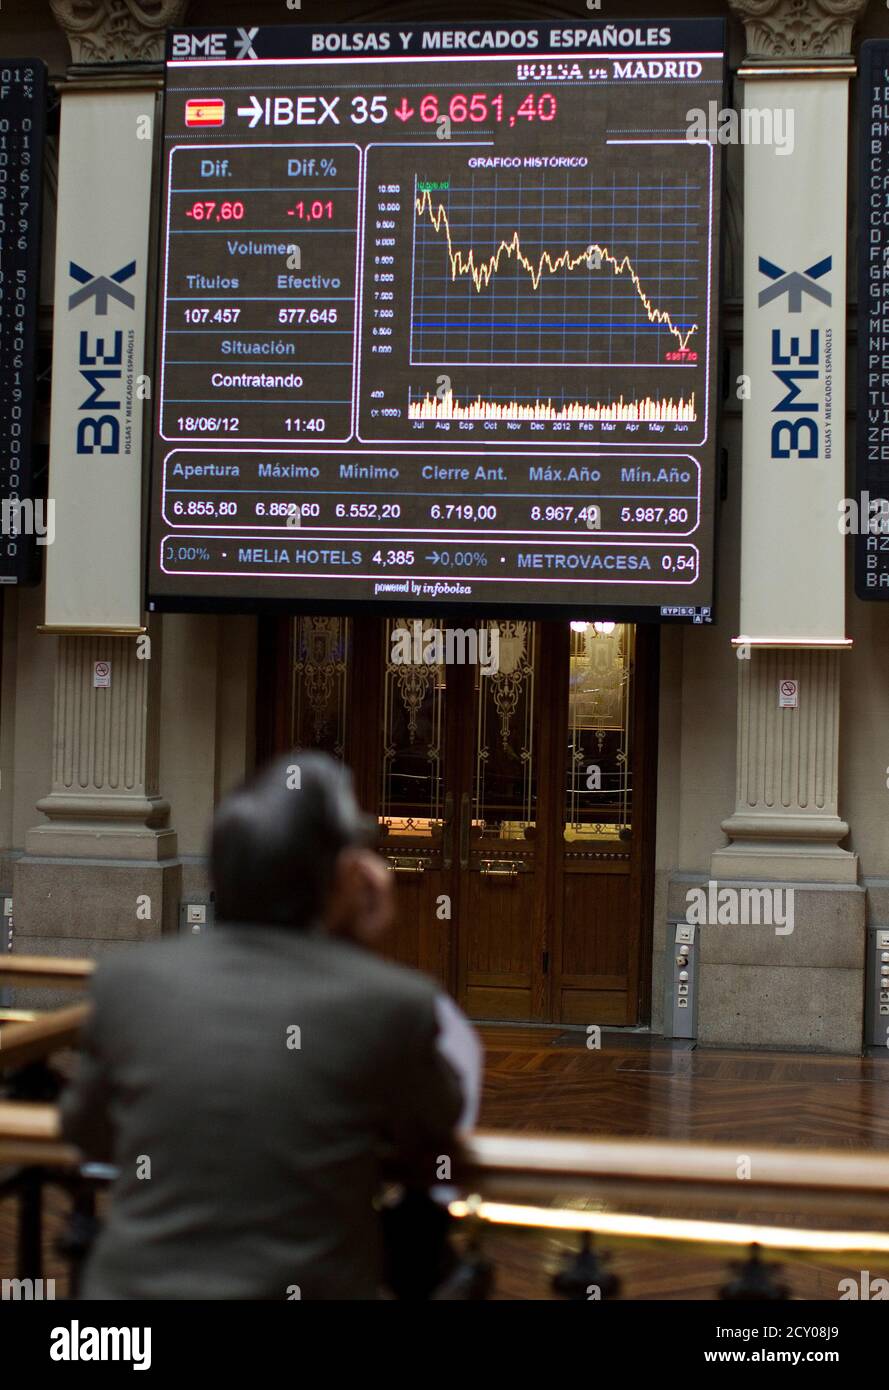 A man looks at the IBEX 35 session on an electronic board at the Madrid stock exchange, June 18, 2012. Spanish bond yields hit a new euro-era high above seven percent and Italian yields jumped on Monday as initial relief after a pro-bailout victory in Greek elections gave way to pessimism about the huge problems still facing the currency bloc.  REUTERS/Paul Hanna  (SPAIN - Tags: BUSINESS) Stock Photo